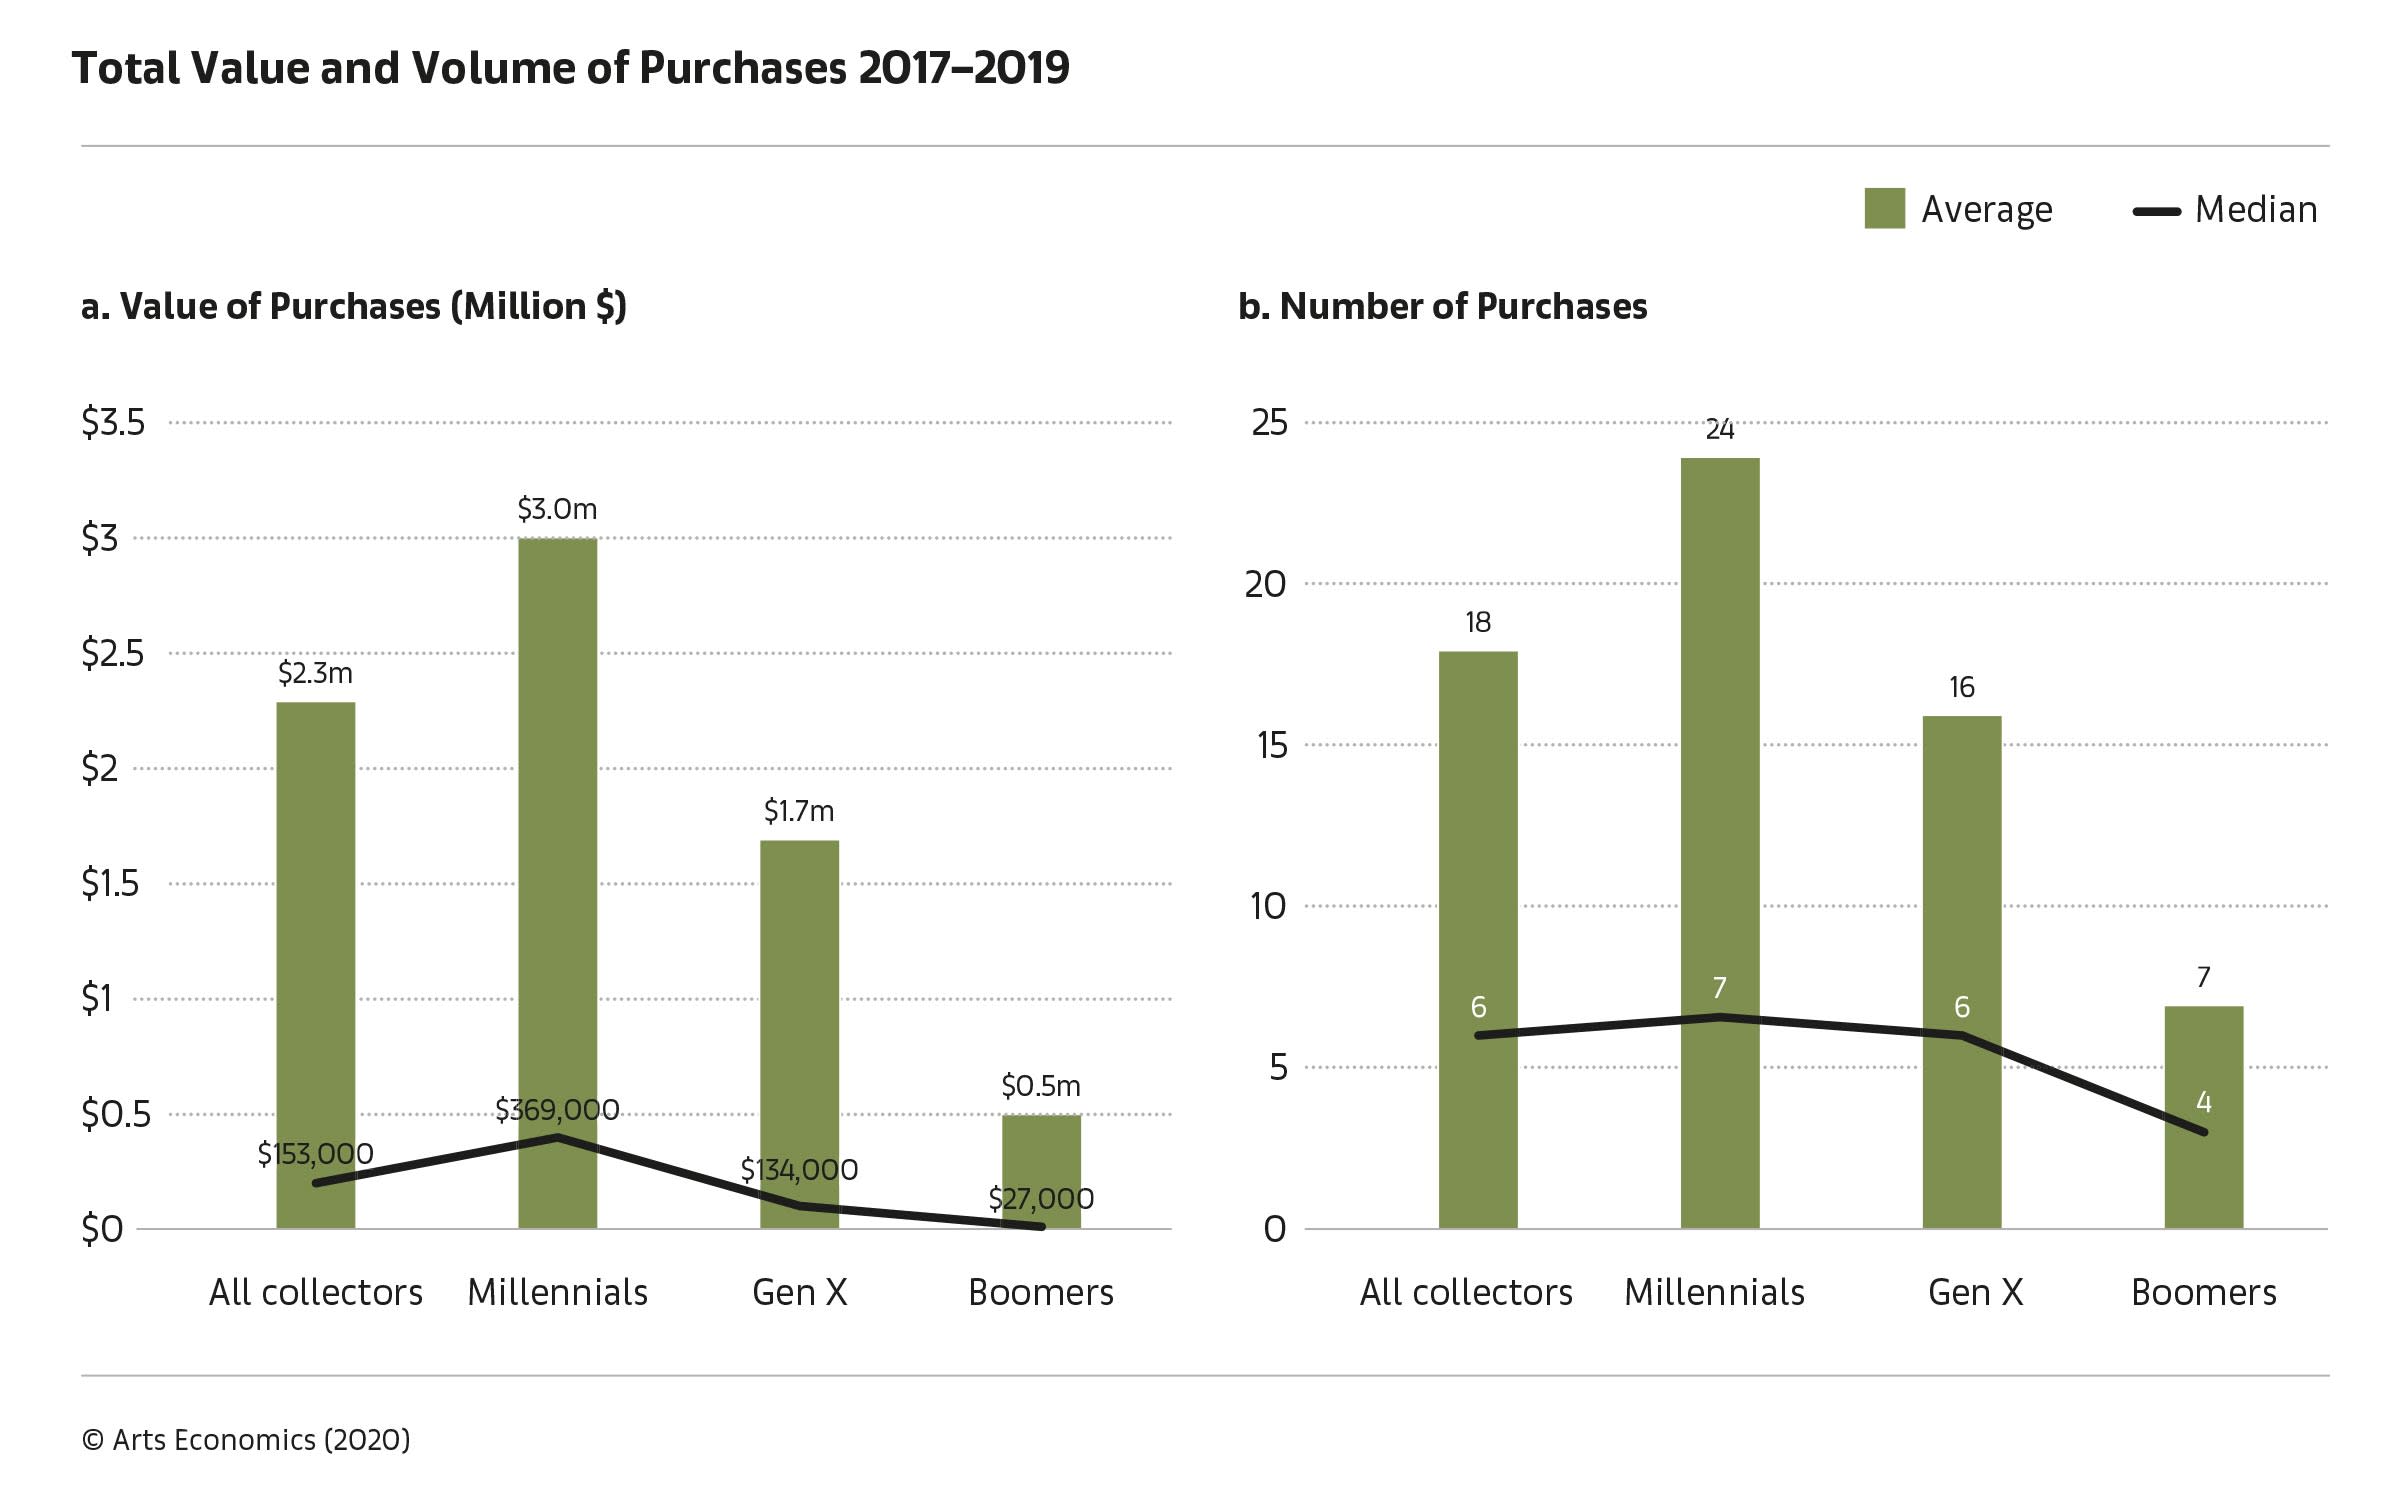 Surveys of more than 1,300 HNW collectors conducted by Arts Economics and UBS Investor Watch in seven markets (the US, UK, France, Germany, Singapore, Hong Kong, and Taiwan) indicated that millennial collectors purchased the most and spent the most.